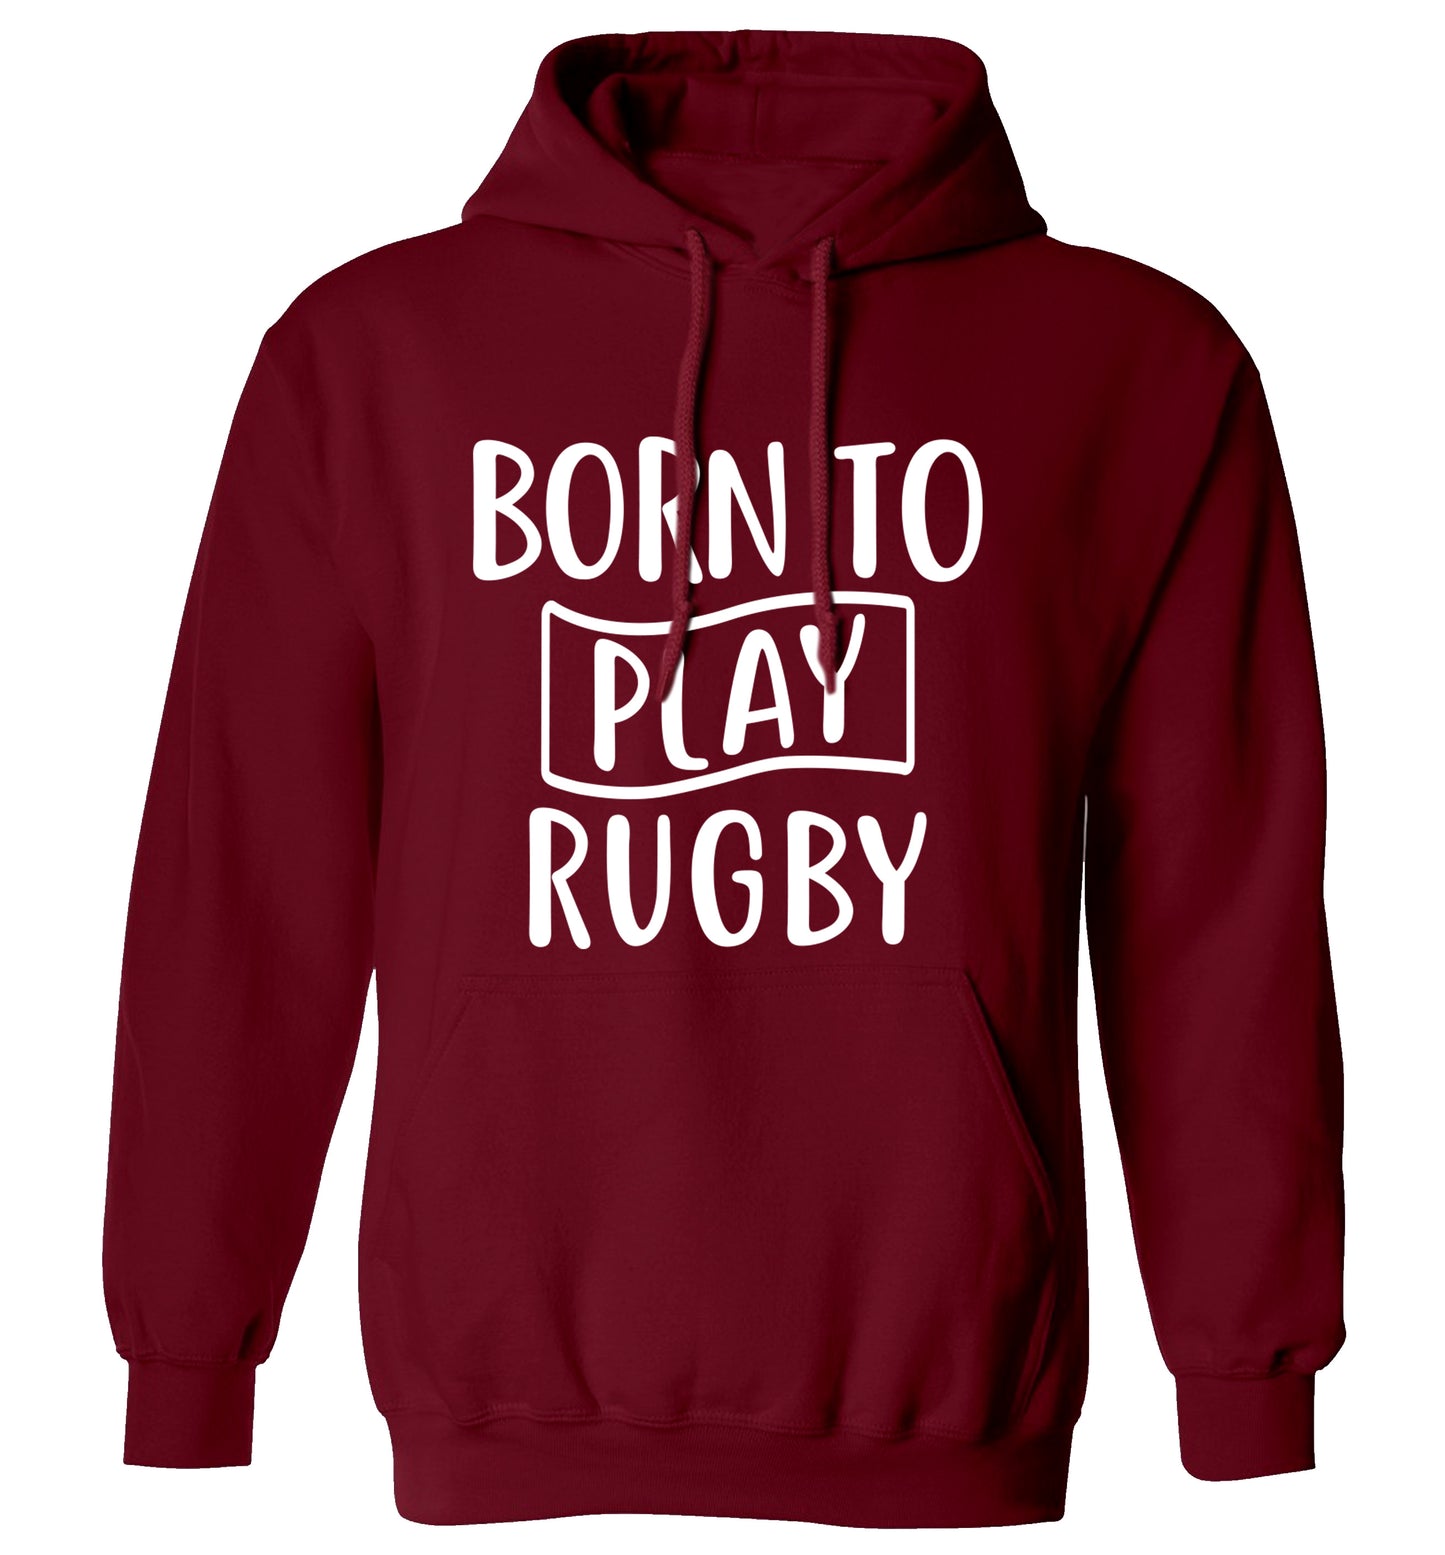 Born to play rugby adults unisex maroon hoodie 2XL